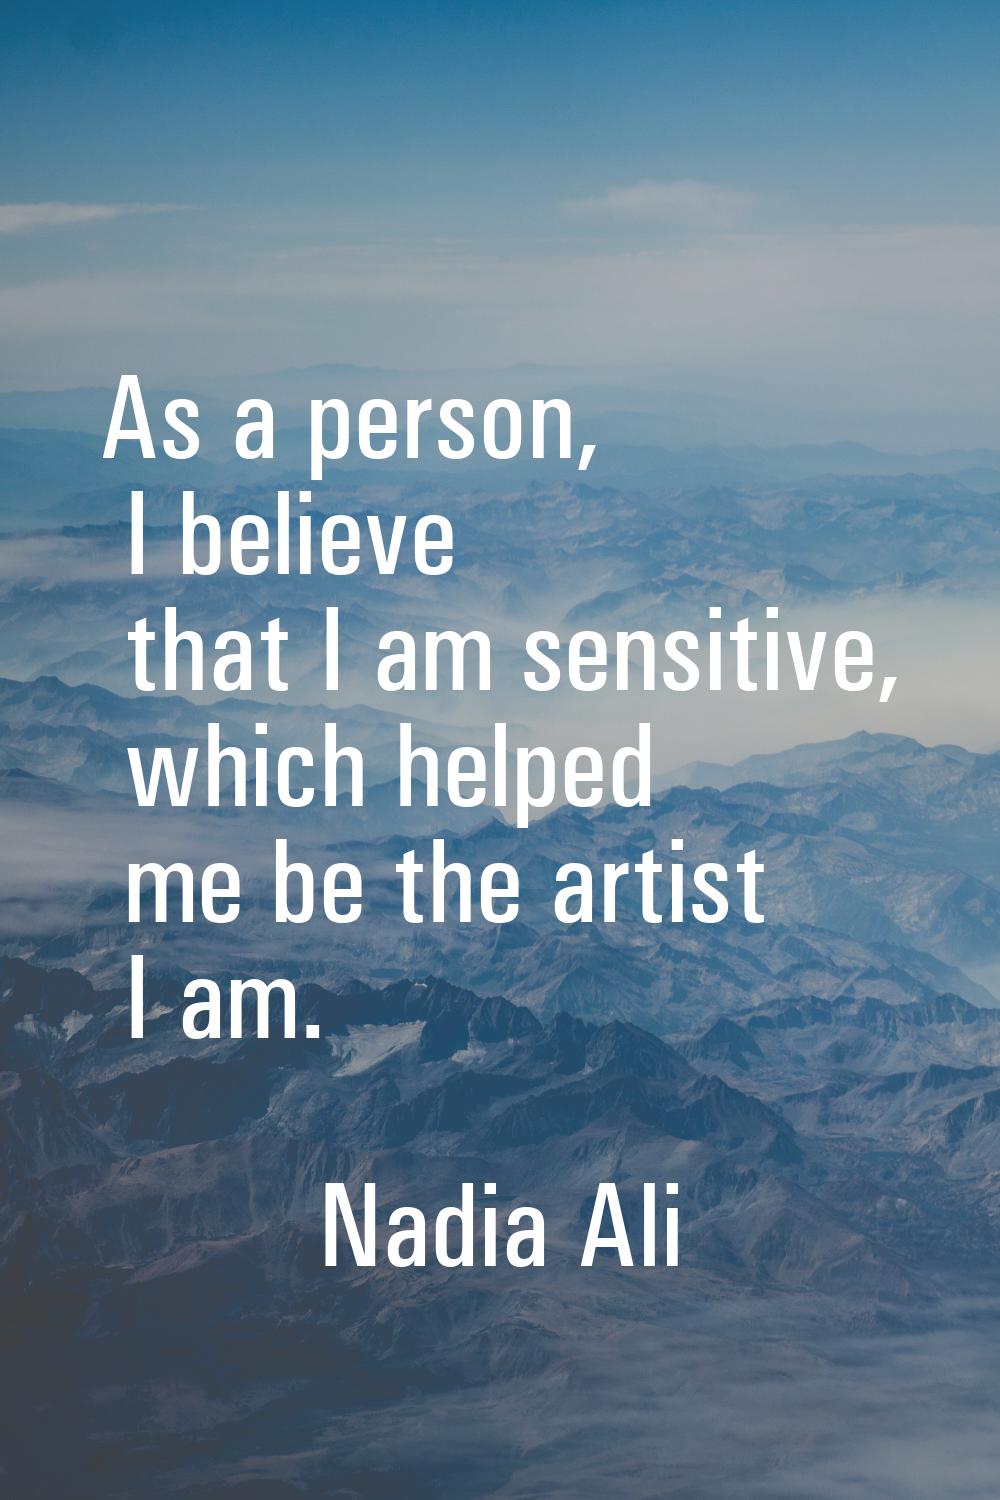 As a person, I believe that I am sensitive, which helped me be the artist I am.